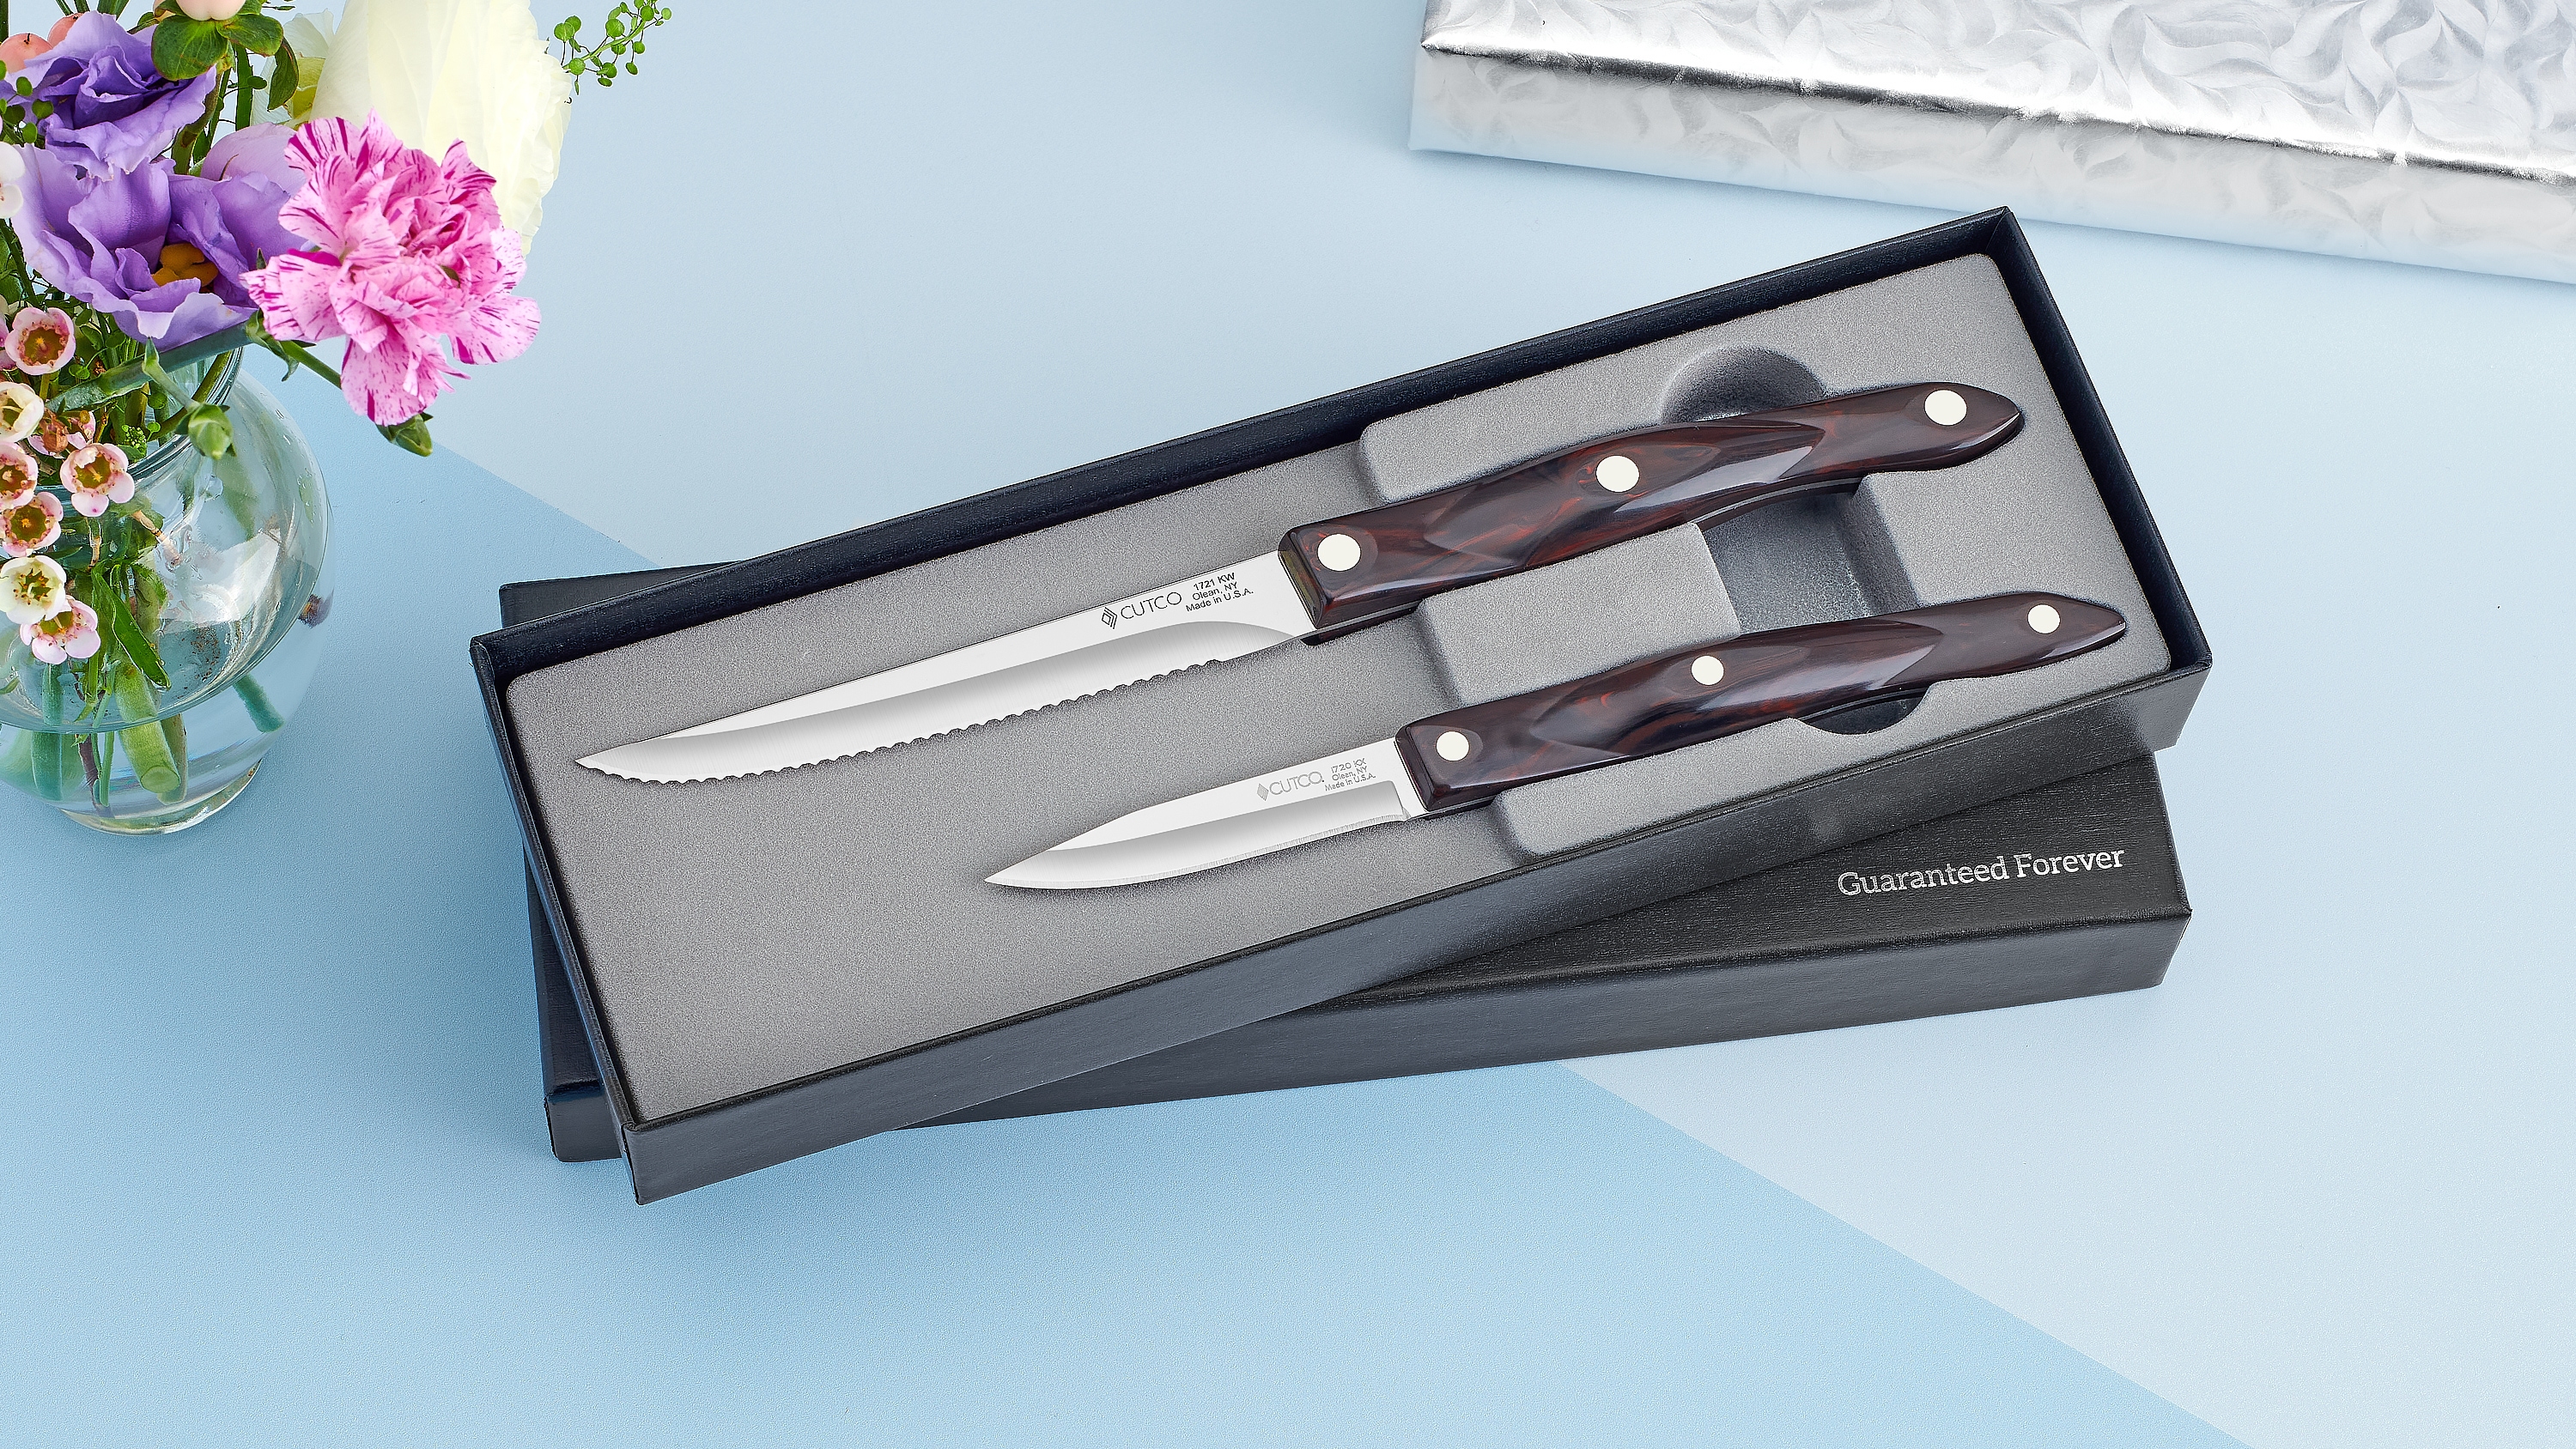 Cutco 4 Piece Table Knife Set Giveaway: Day 2